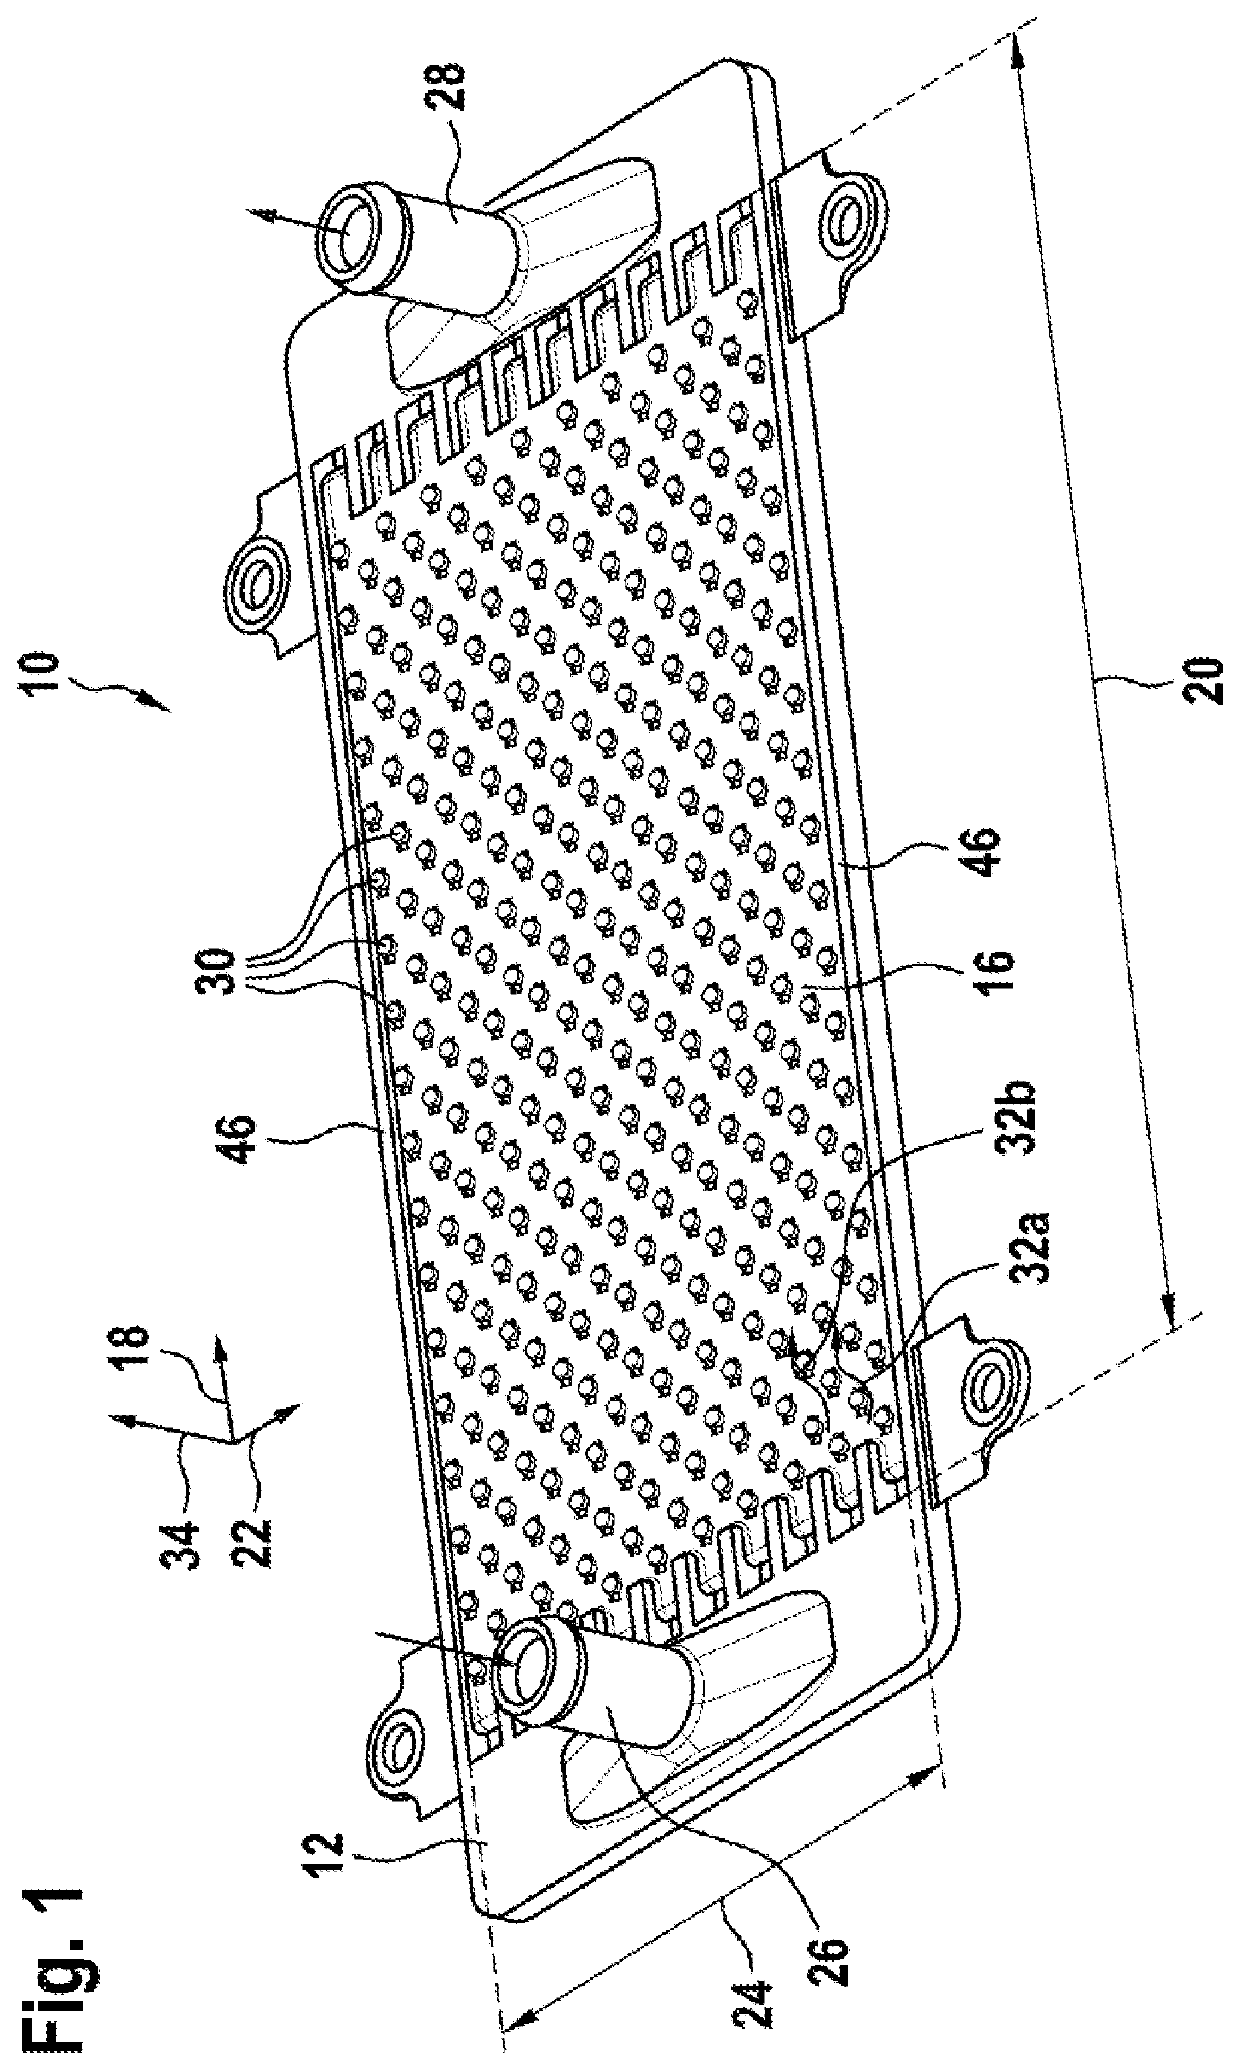 Cooling plate for the temperature control of at least one battery cell and a battery system